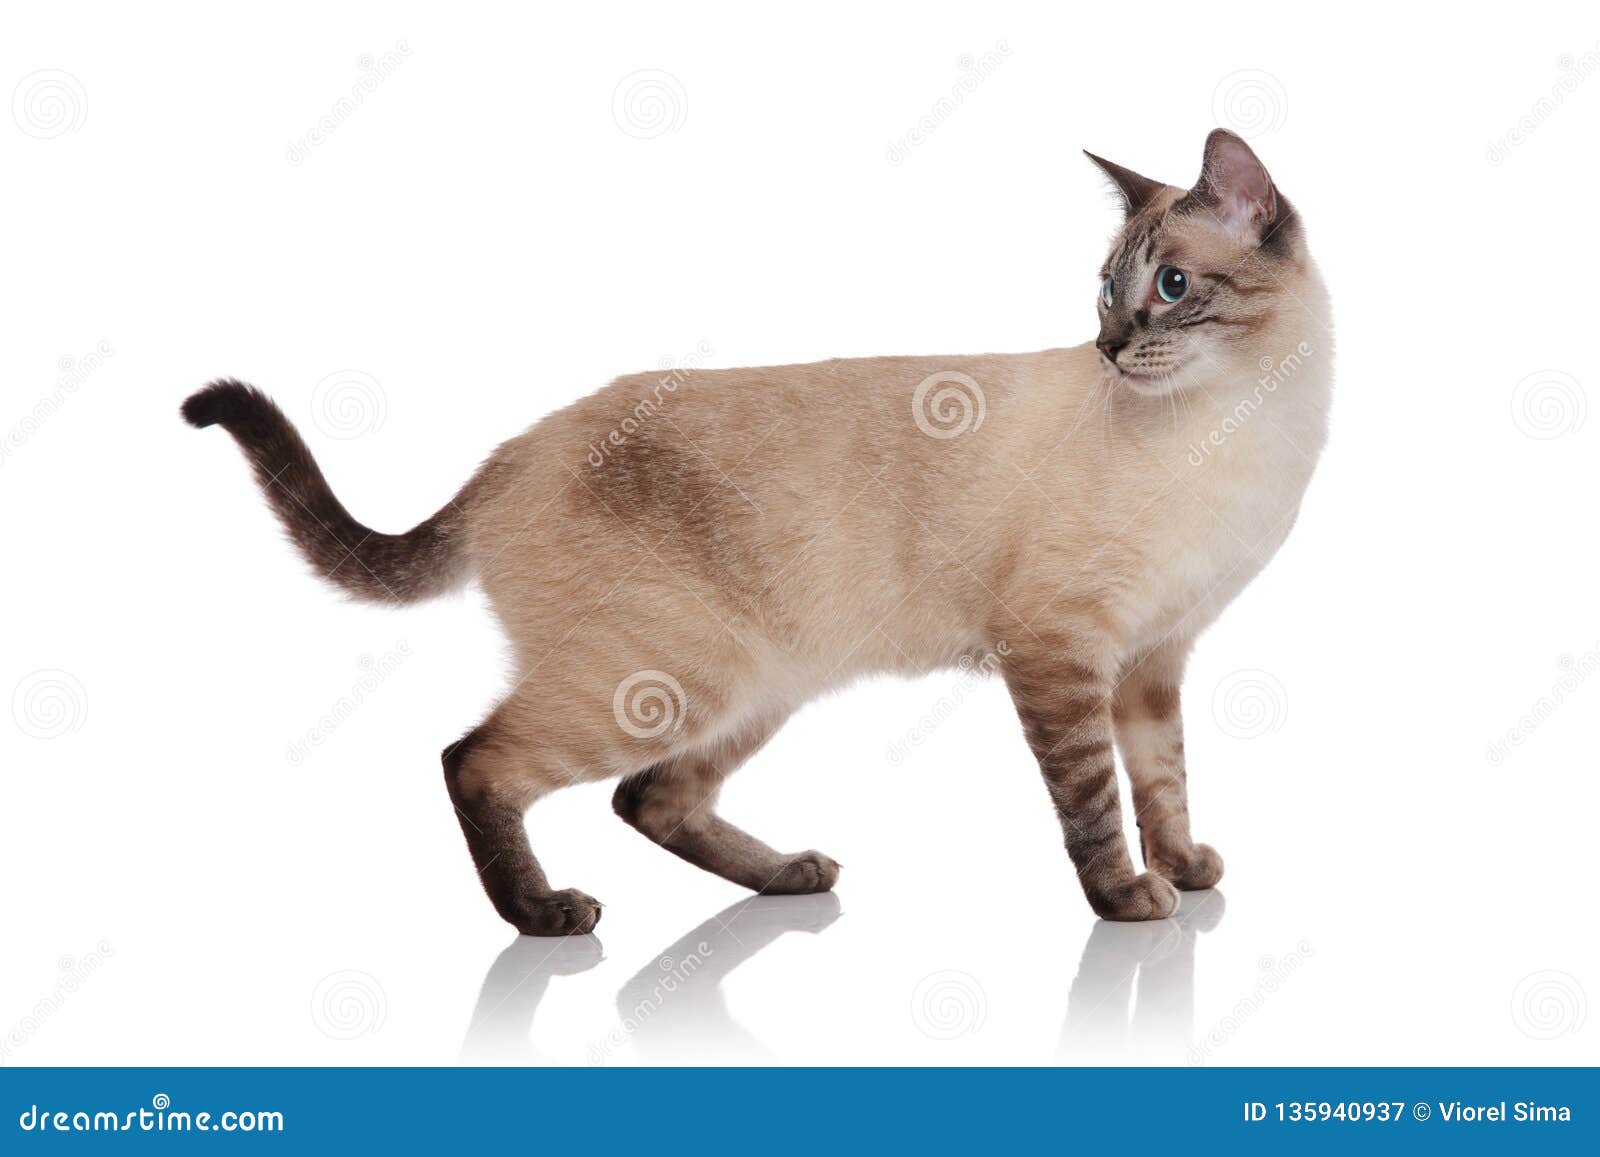 Side View Of Grey Burmese Cat Standing And Looking Behind Stock Image